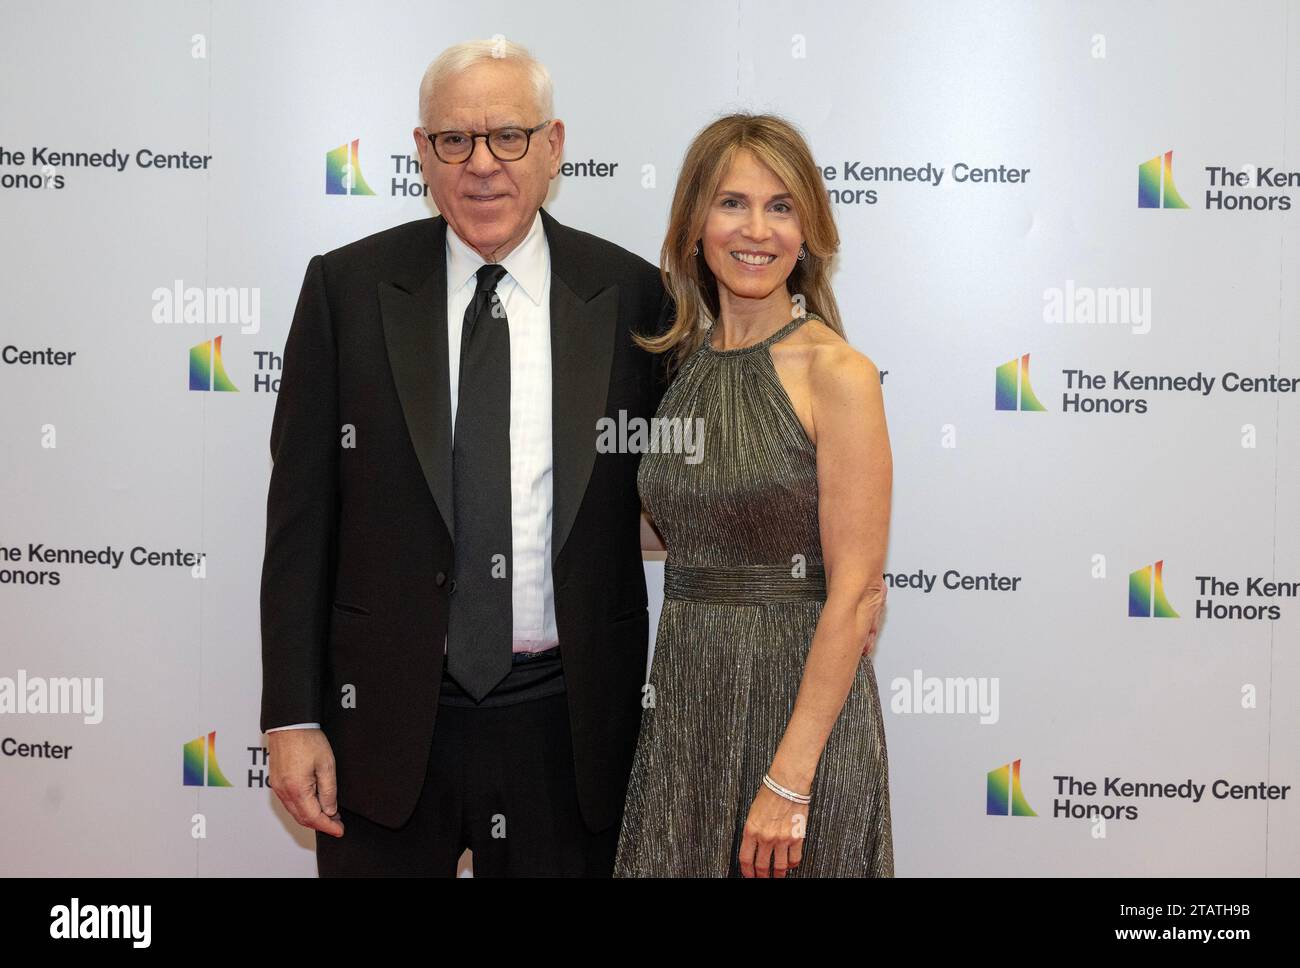 Washington, United States Of America. 02nd Dec, 2023. David Rubenstein and Caryn Zucker arrive for the Medallion Ceremony honoring the recipients of the 46th Annual Kennedy Center Honors at the Department of State in Washington, DC on Saturday, December 2, 2023. The 2023 honorees are: actor and comedian Billy Crystal; acclaimed soprano Renee Fleming; British singer-songwriter producer, and member of the Bee Gees, Barry Gibb; rapper, singer, and actress Queen Latifah; and singer Dionne Warwick.Credit: Ron Sachs/Pool/Sipa USA Credit: Sipa USA/Alamy Live News Stock Photo